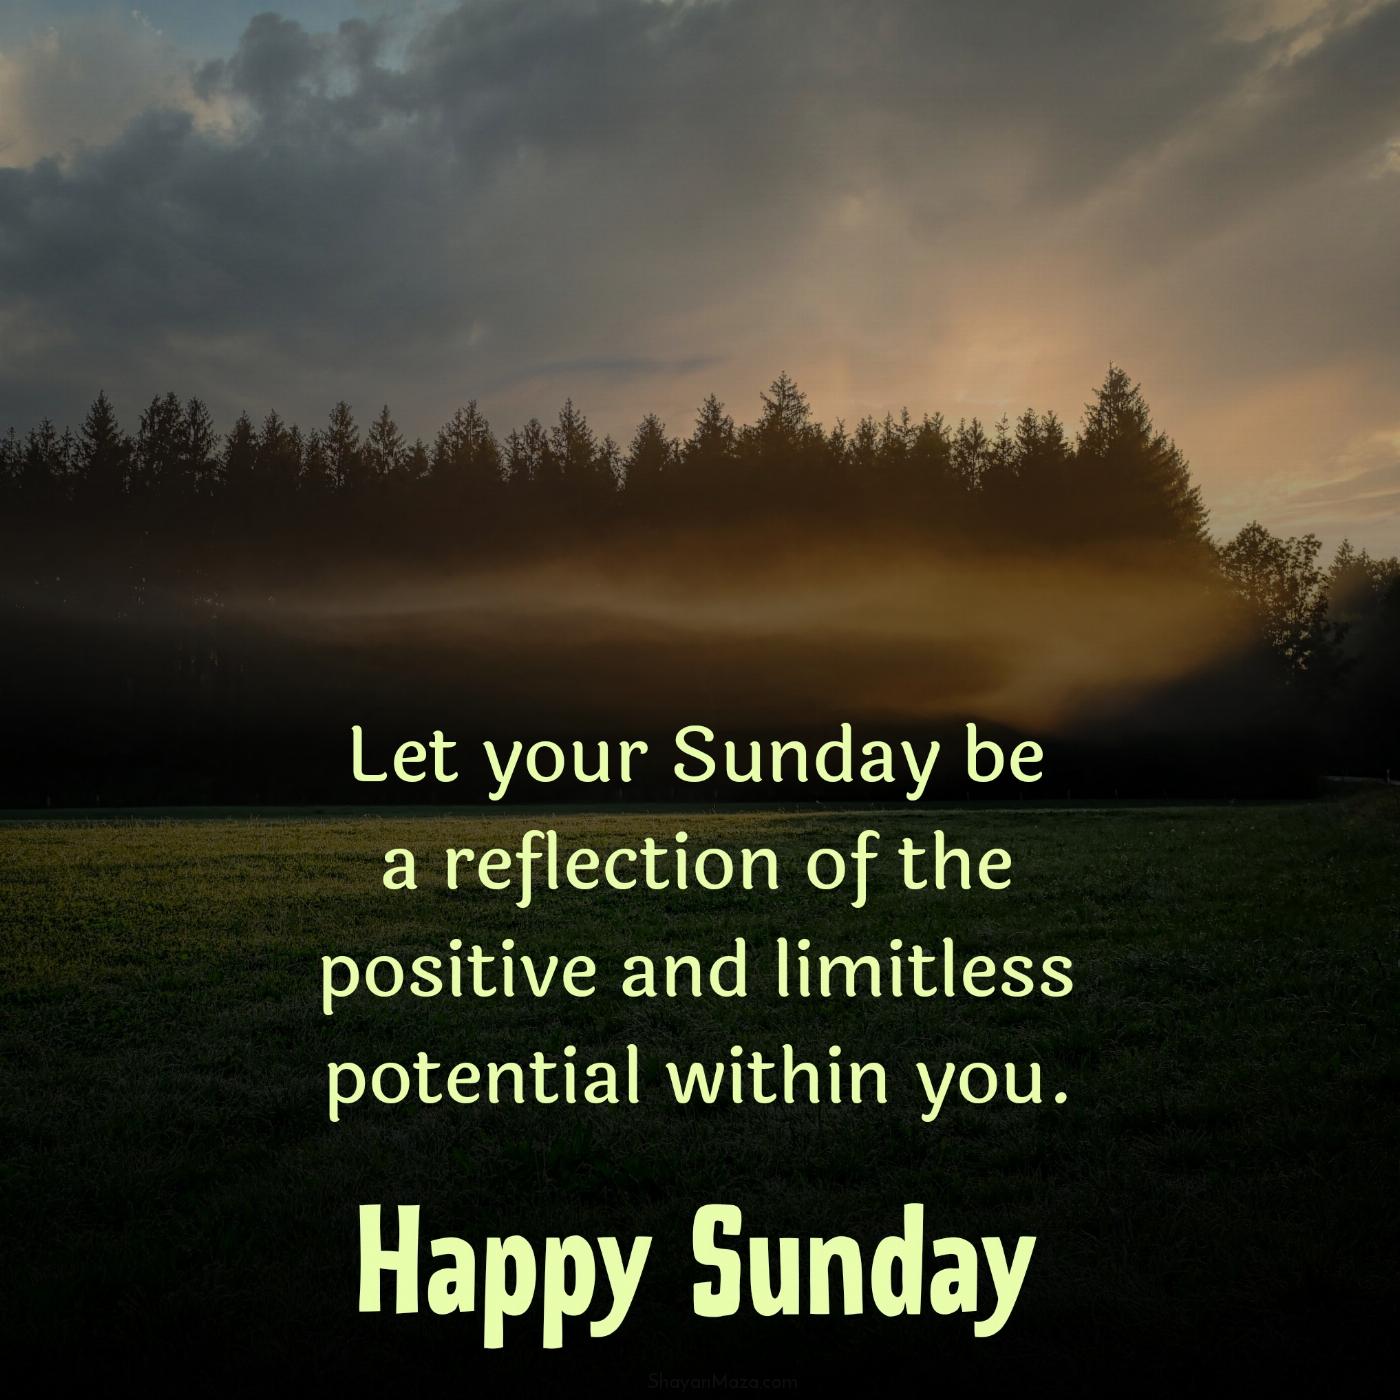 Let your Sunday be a reflection of the positive and limitless potential